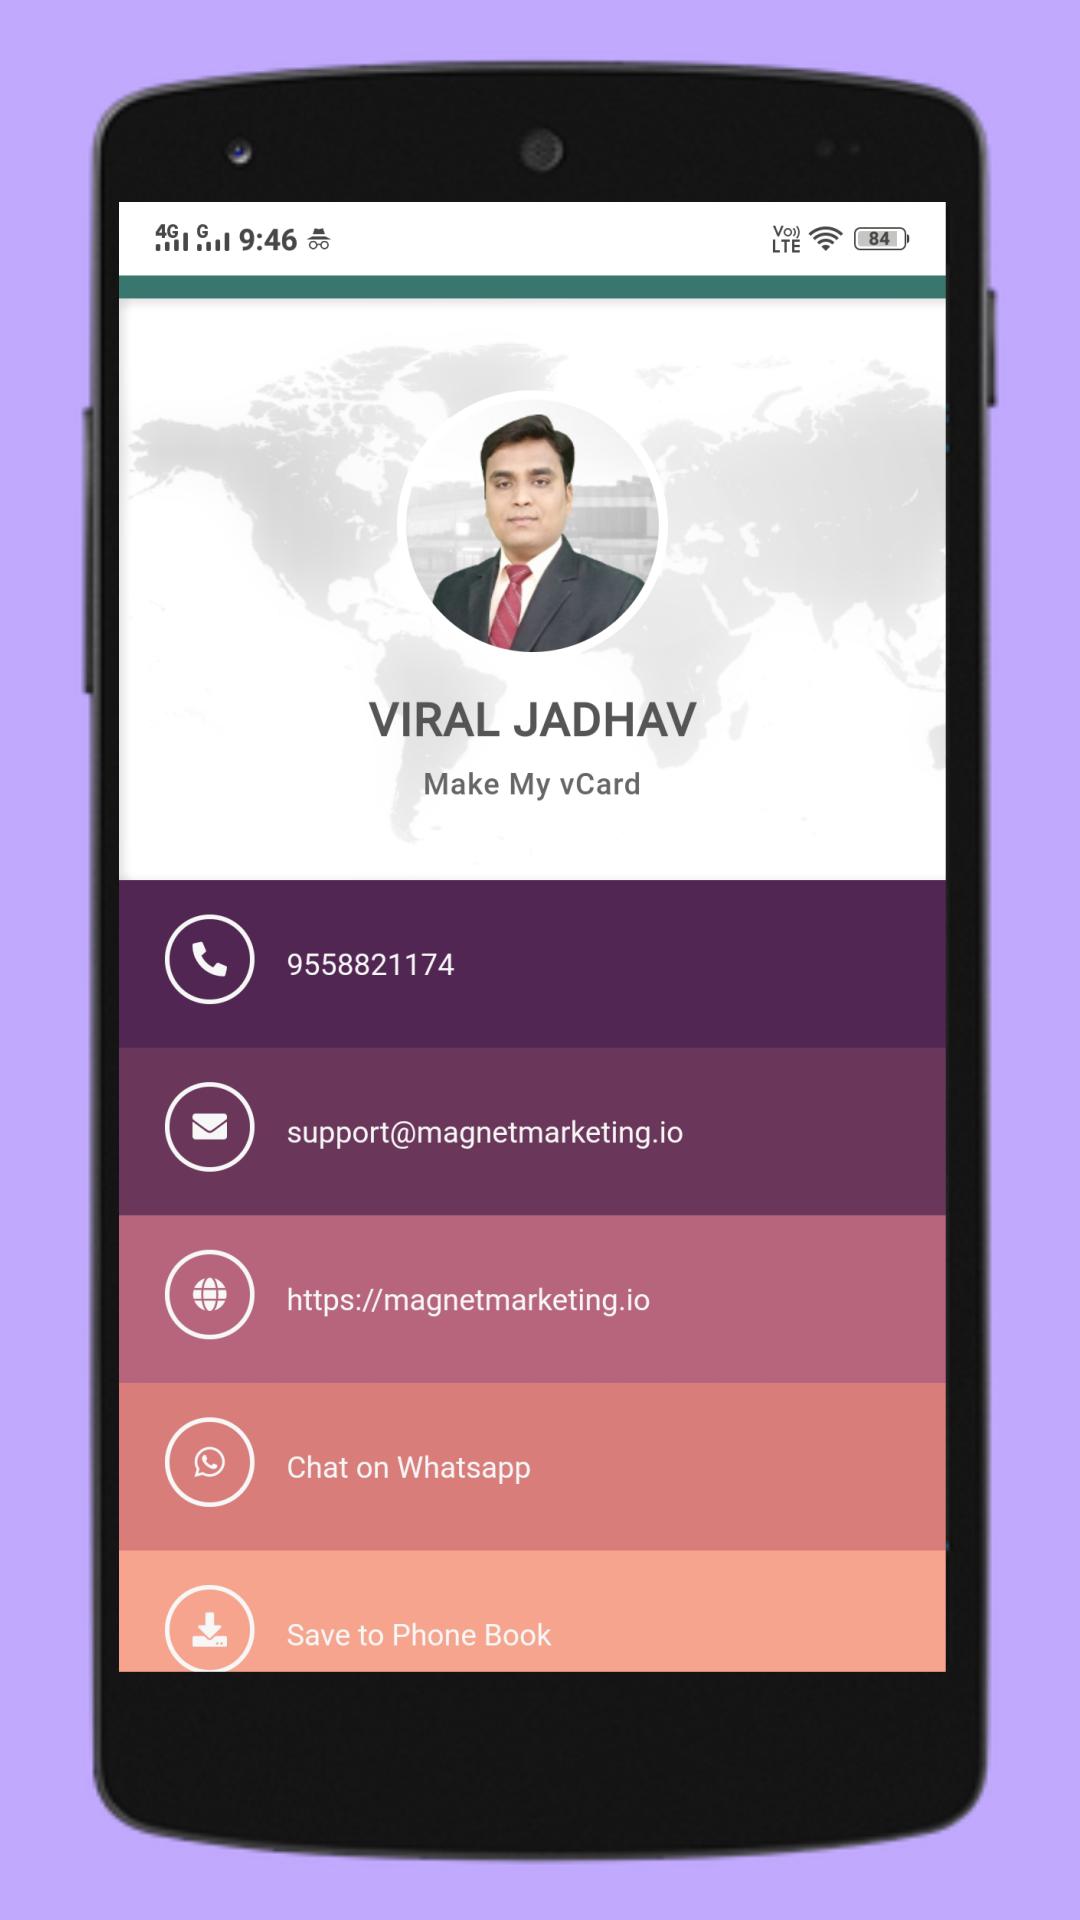 Digital Business Card Maker App by Make My vCard for Android - APK Download